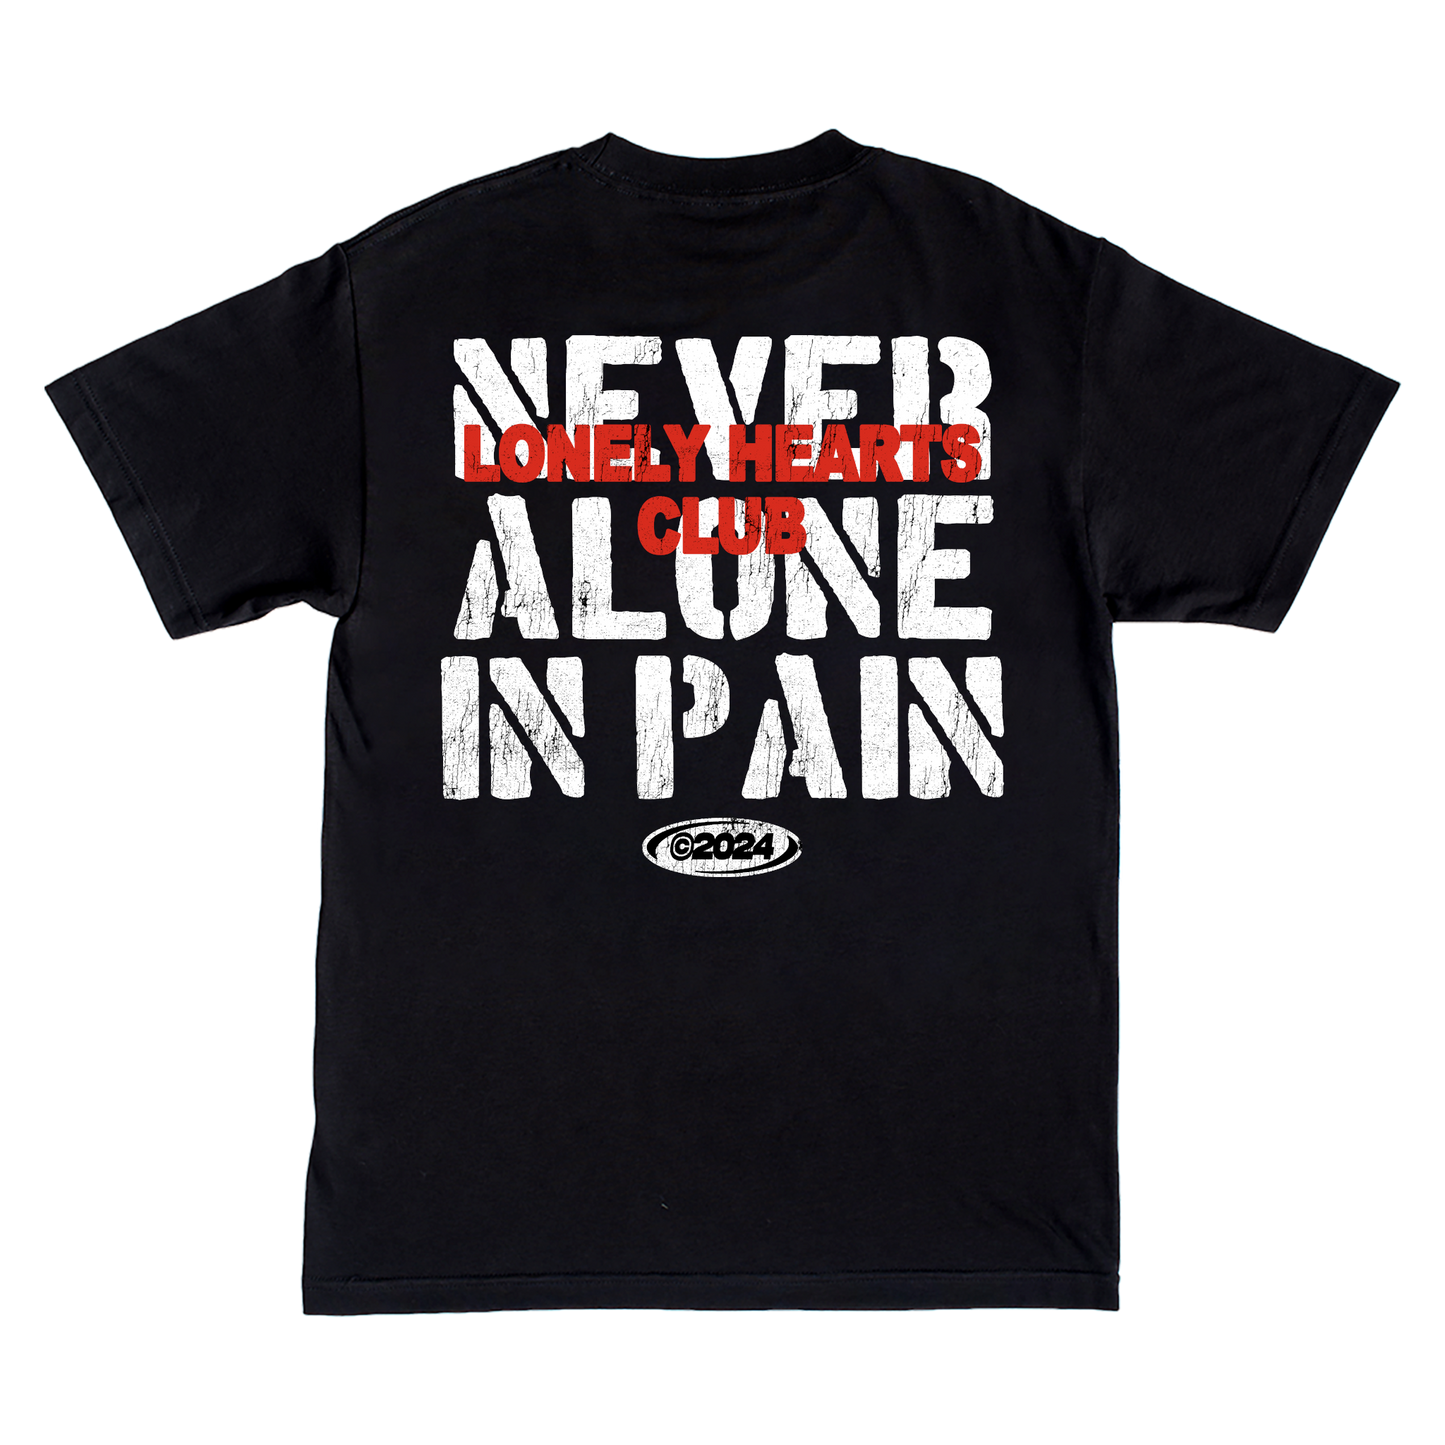 Never Alone In Pain T-Shirt